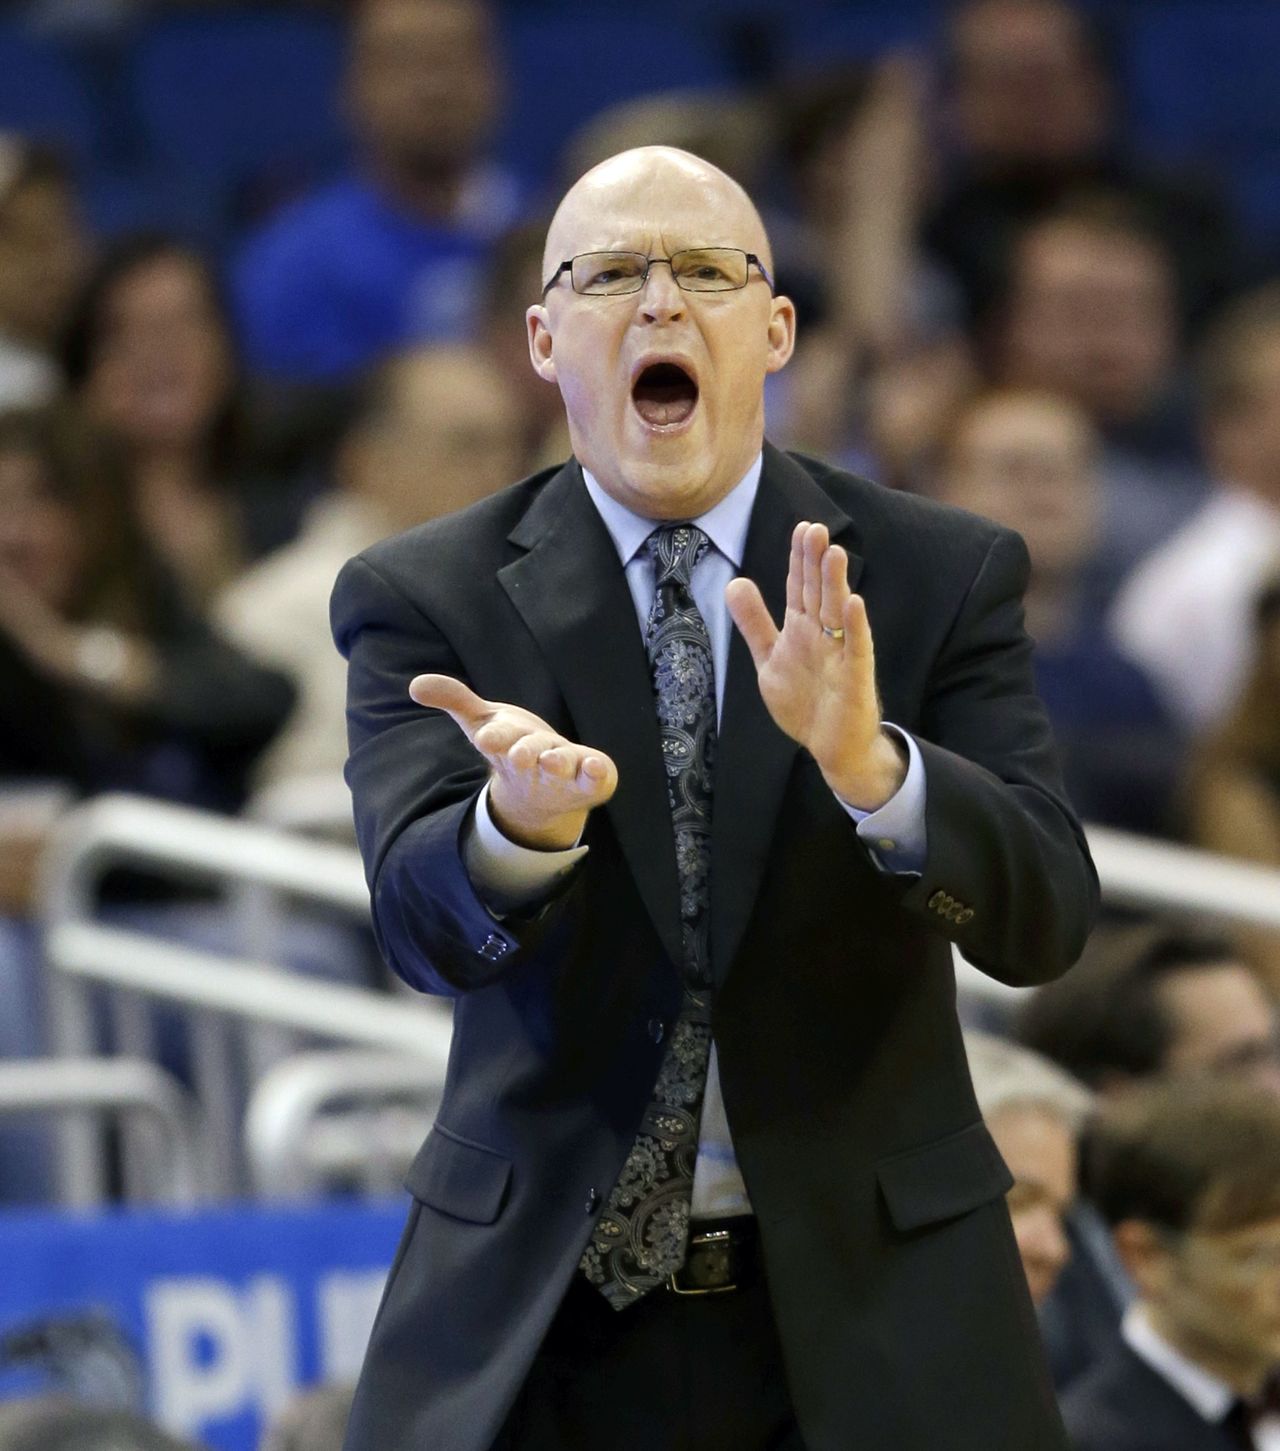 Orlando Magic head coach Scott Skiles encourages his players during a game in February. Skiles has stepped down as the team’s head coach.